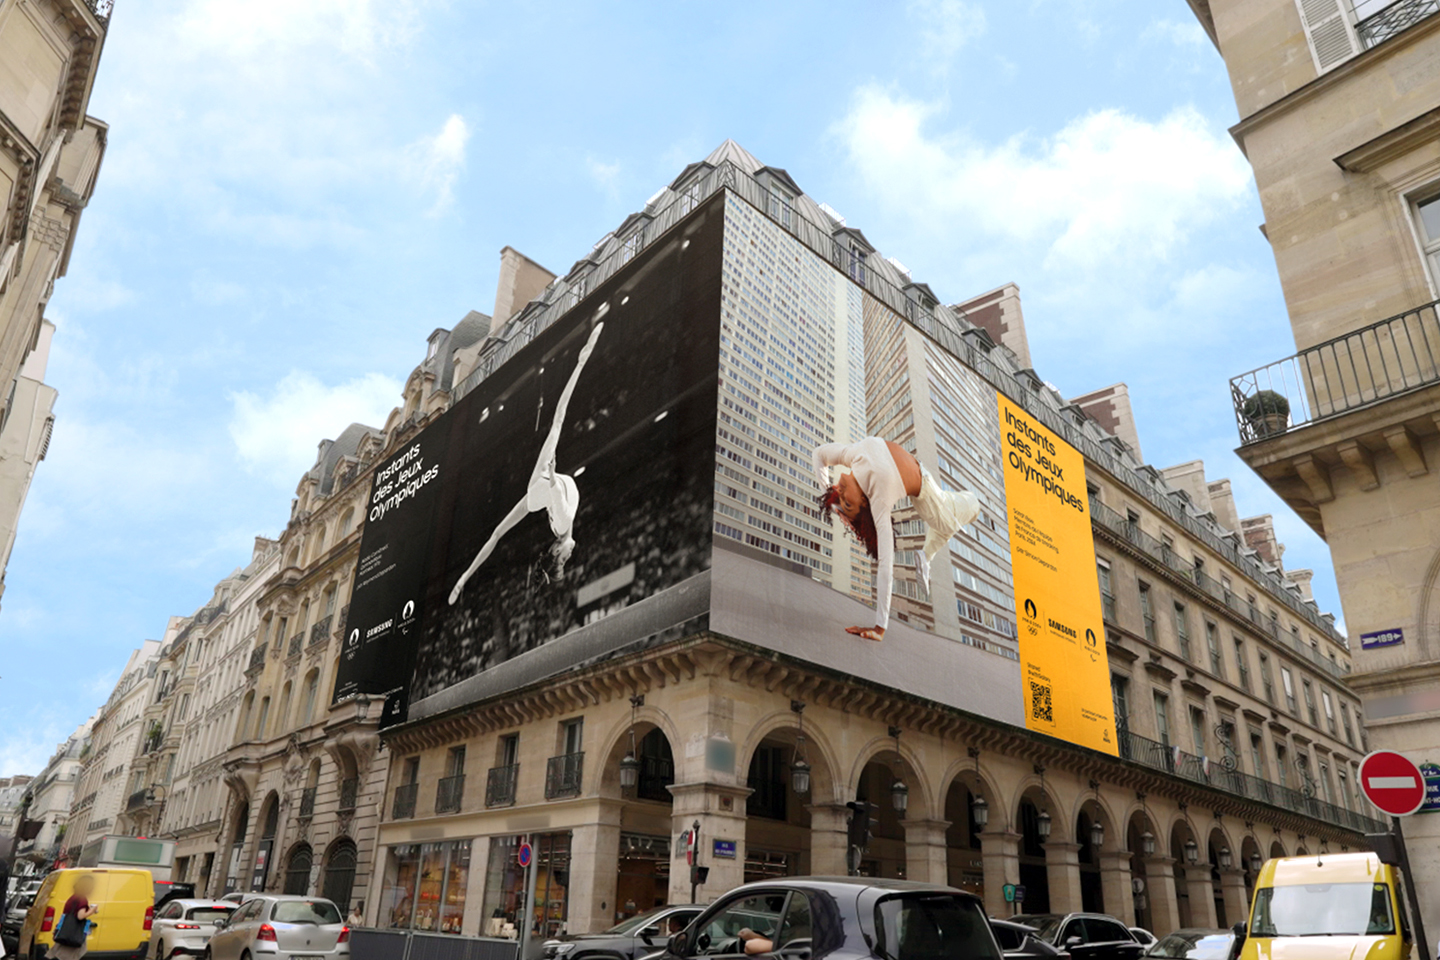 Olympic and Paralympic Games Paris 2024 With New Art Campaign in Pyramides